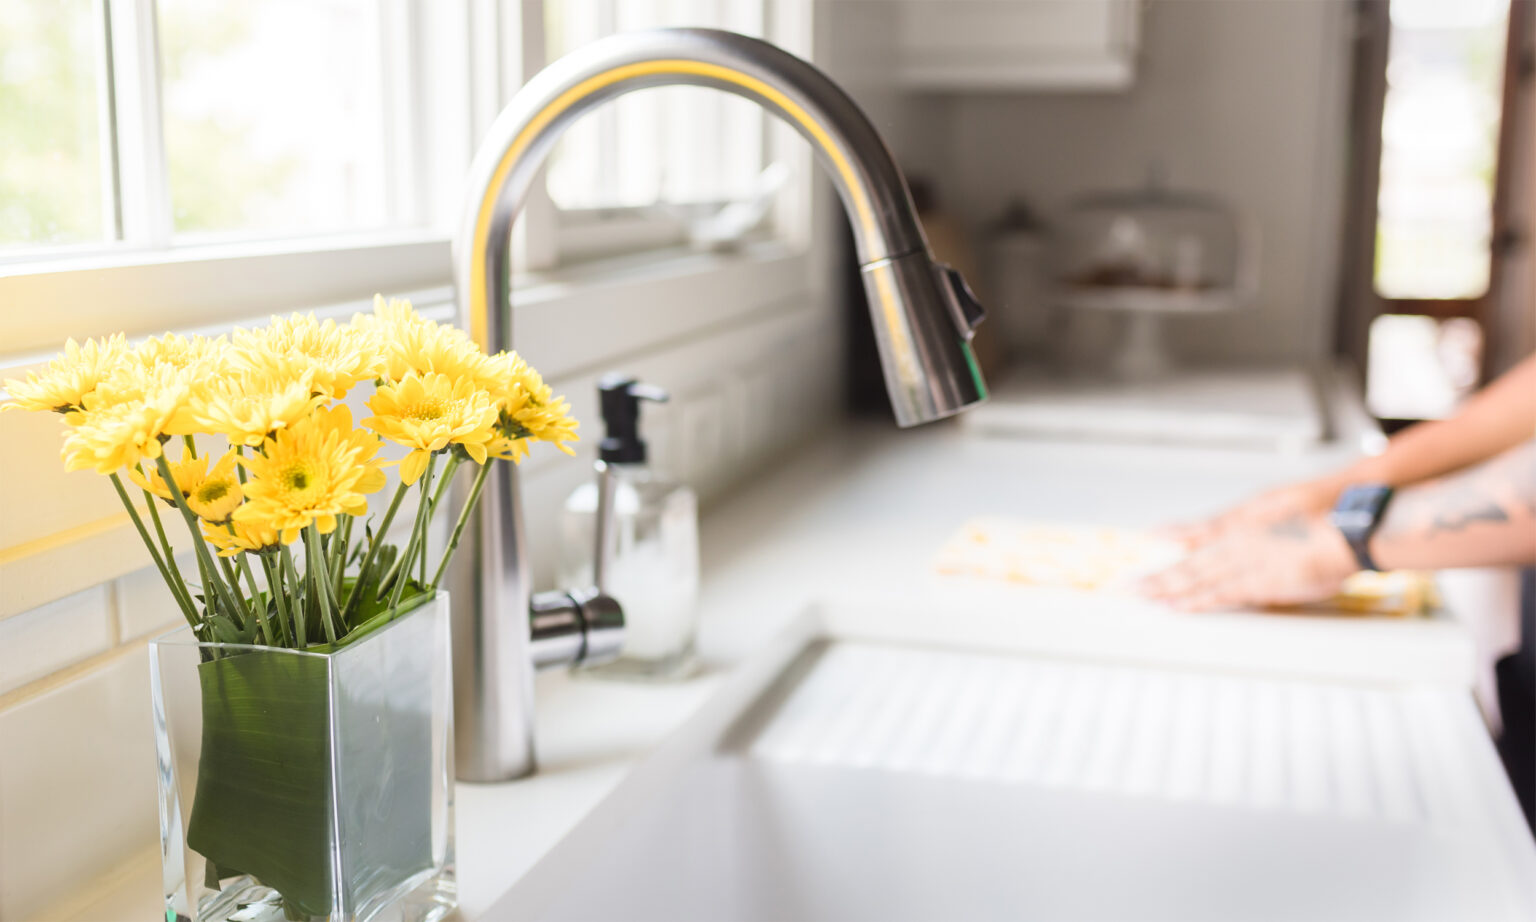 Clean kitchen sink with flowers